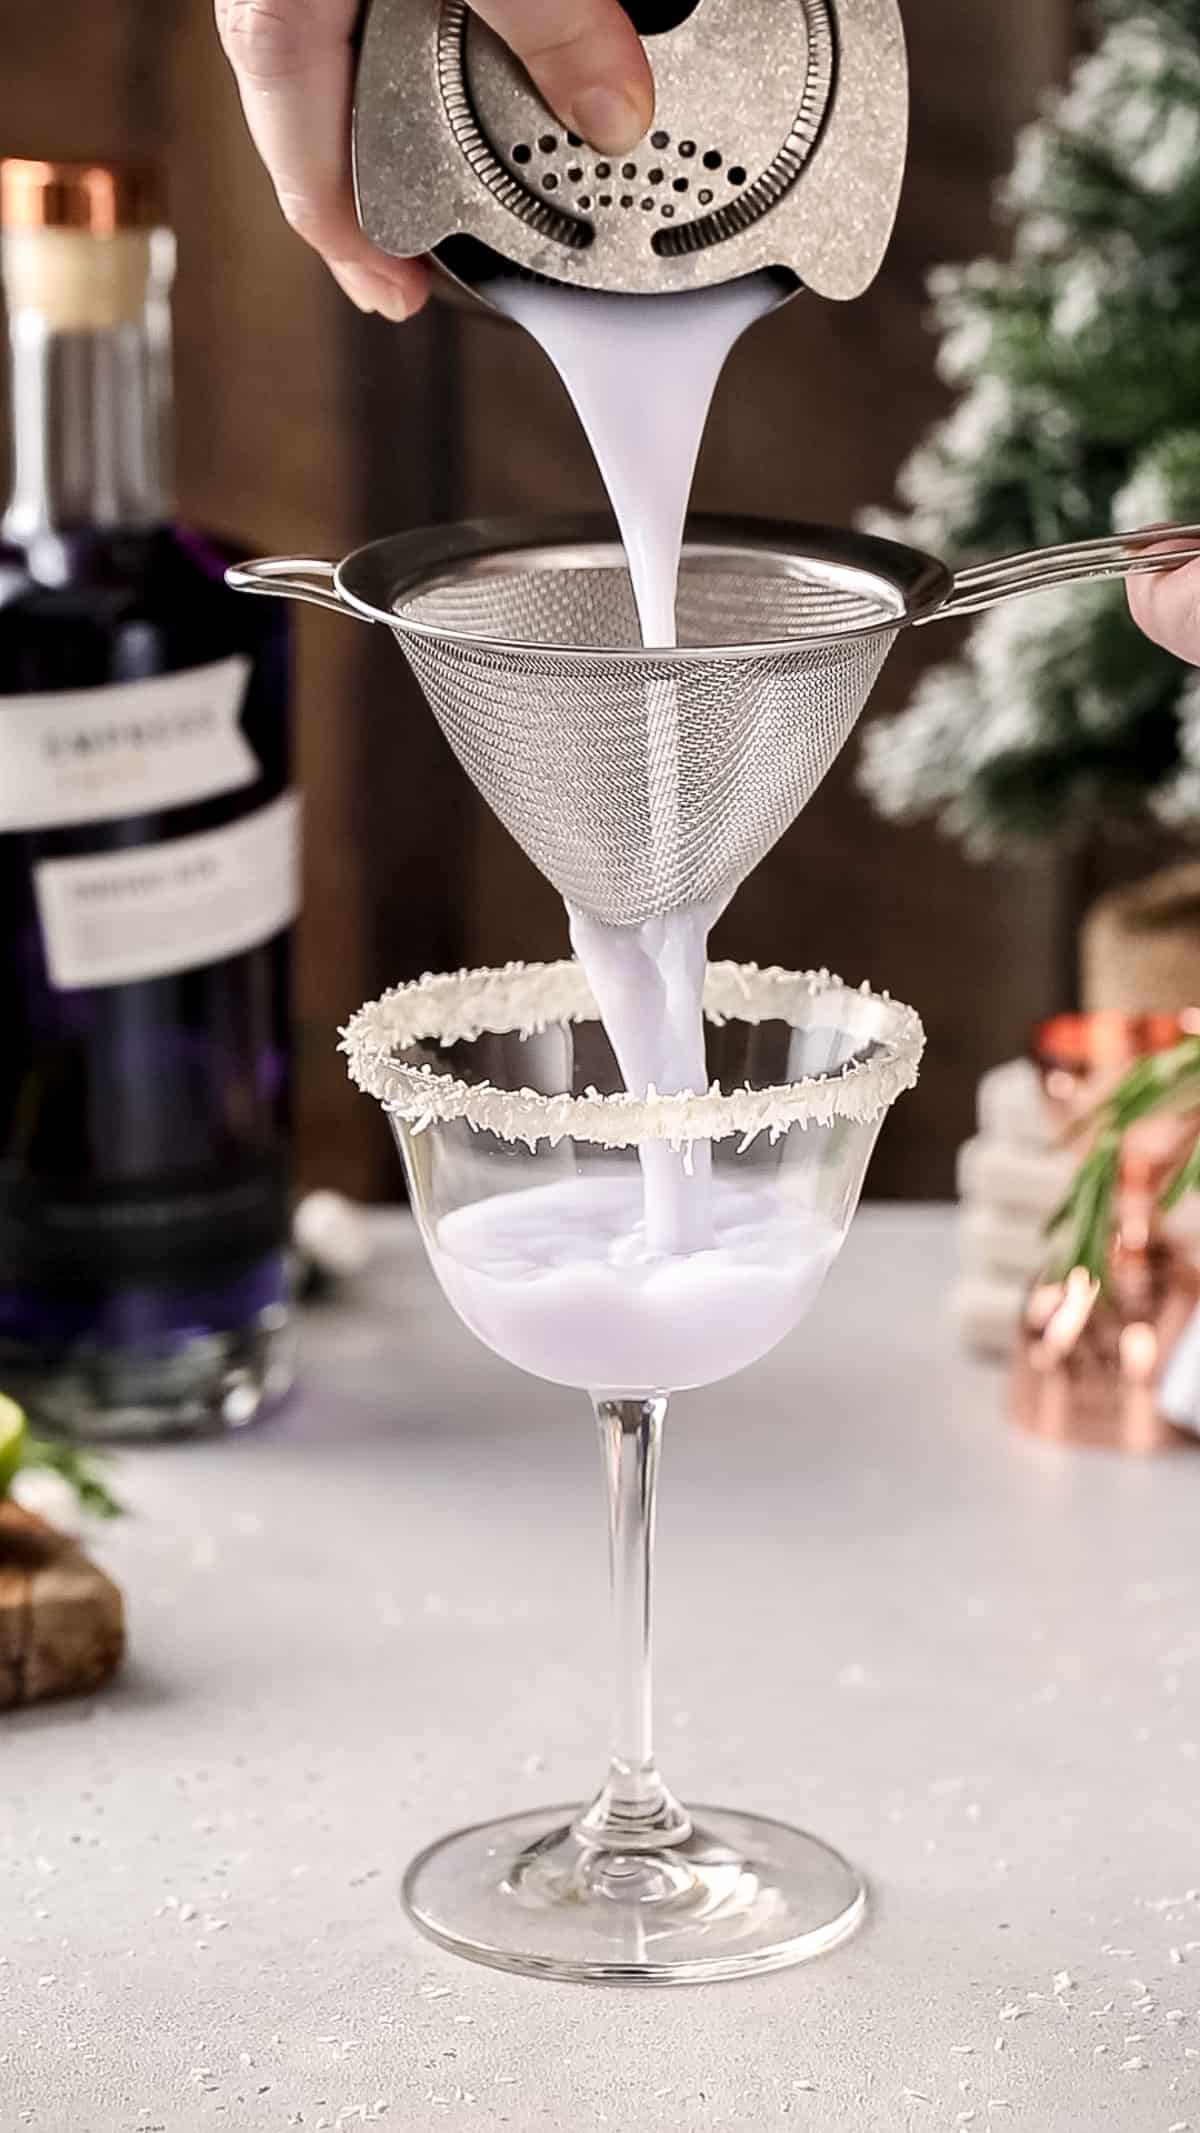 Hand double straining a purple cocktail into a coupe glass with a coconut rim.